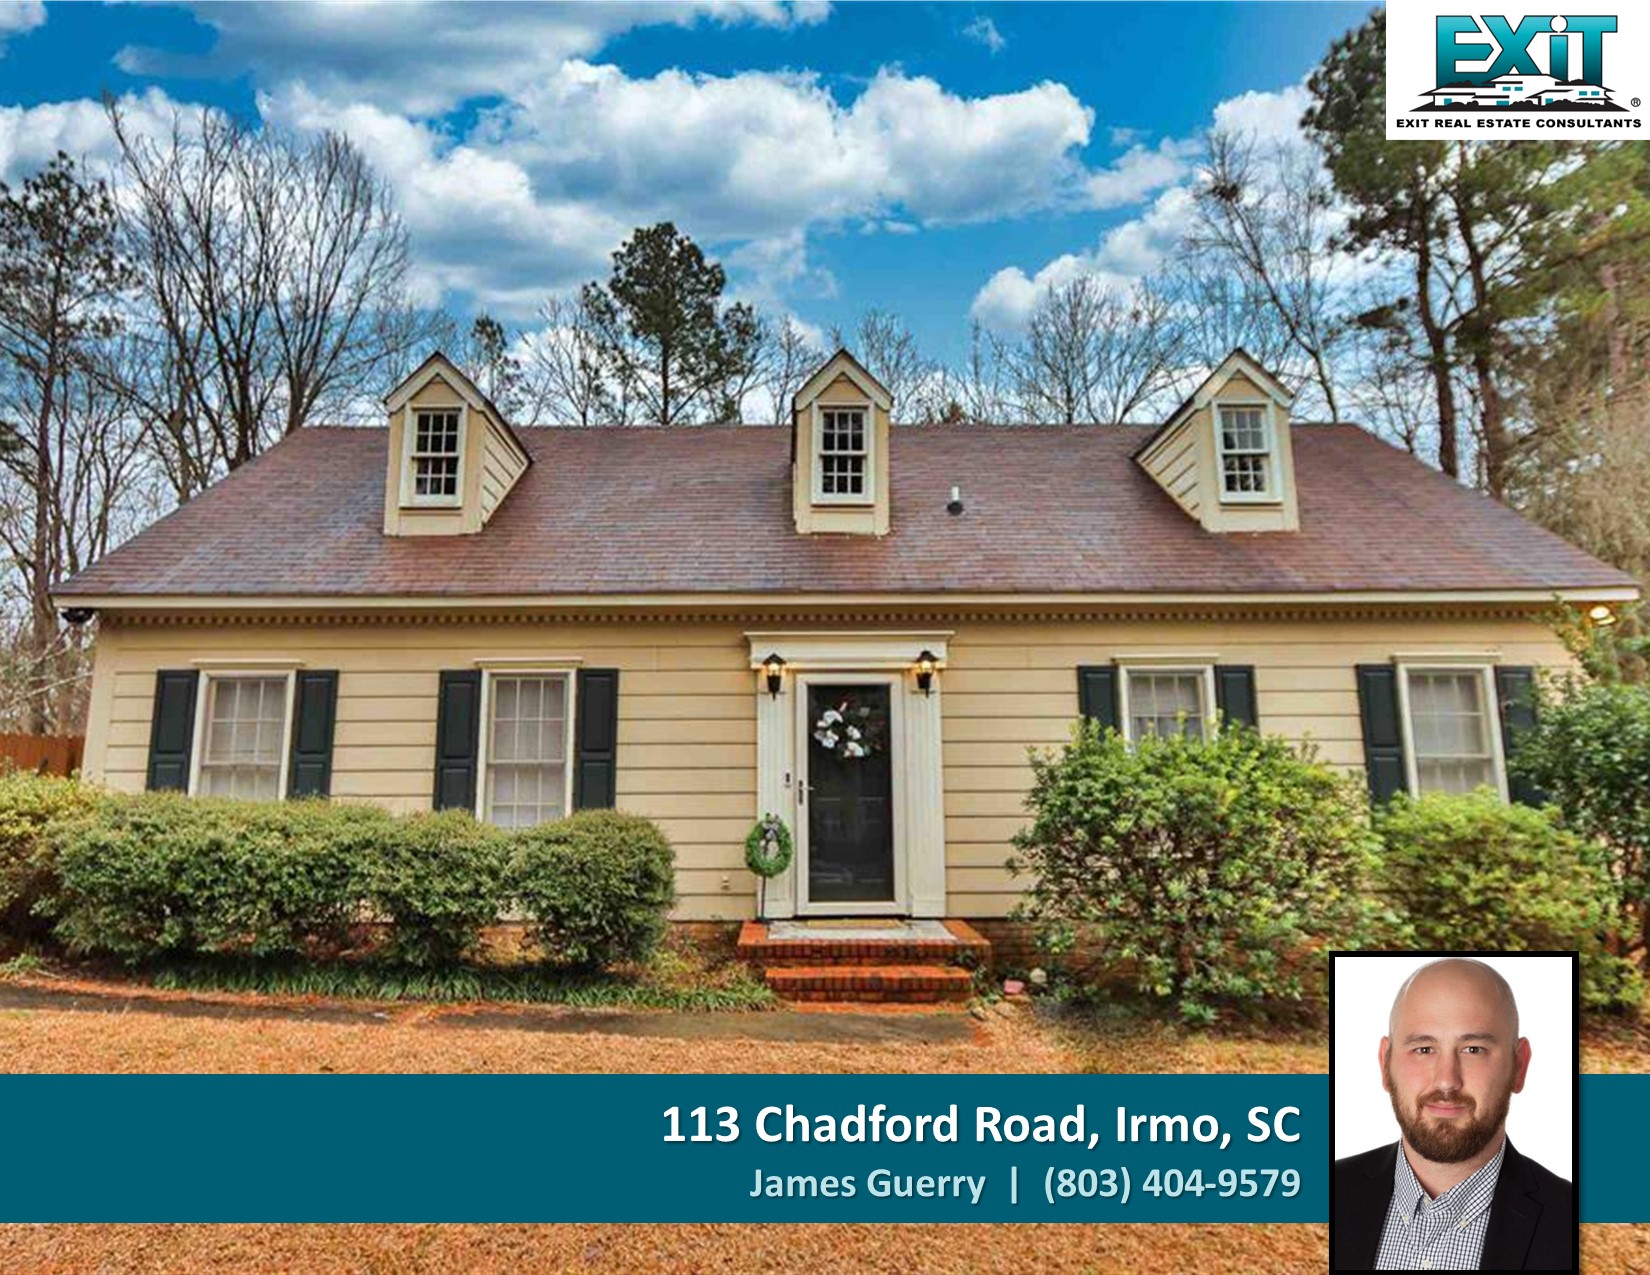 Just listed in New Friarsgate - Irmo